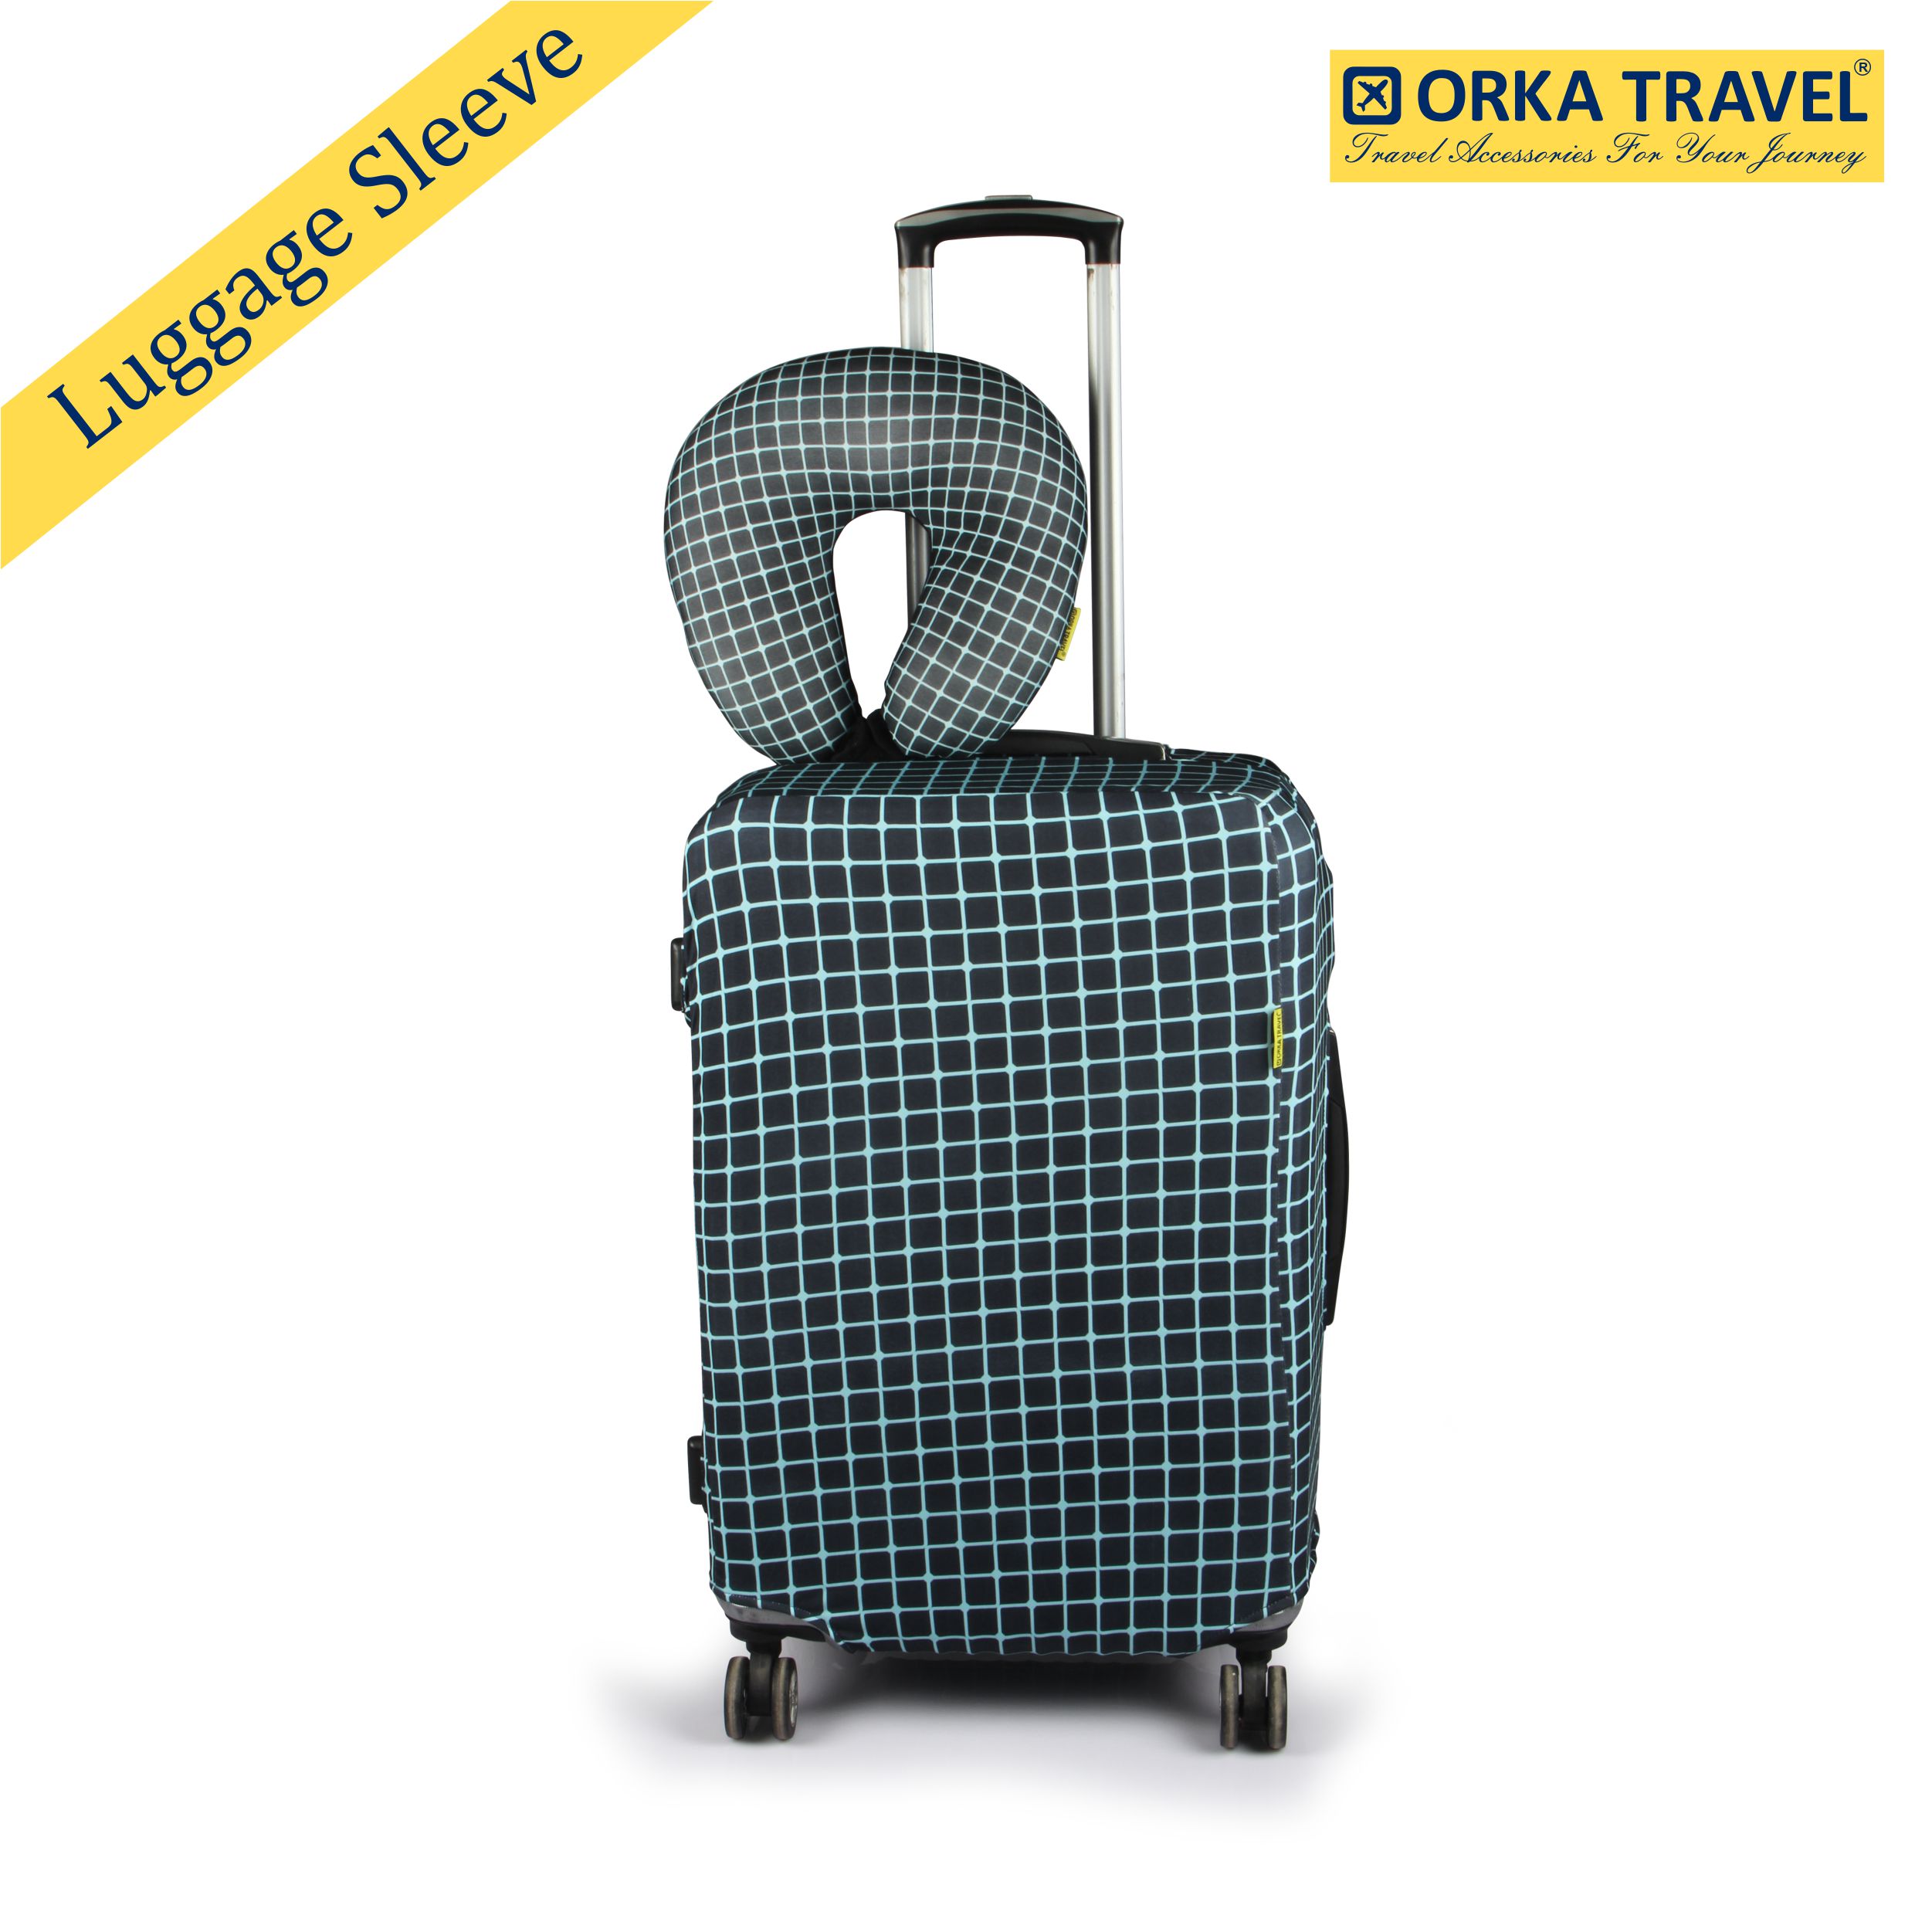 ORKA TRAVEL Black Teal Theme LUGGAGE PROTECTOR WITH MATCHING U NECK PILLOW LUGGAGE COVER  